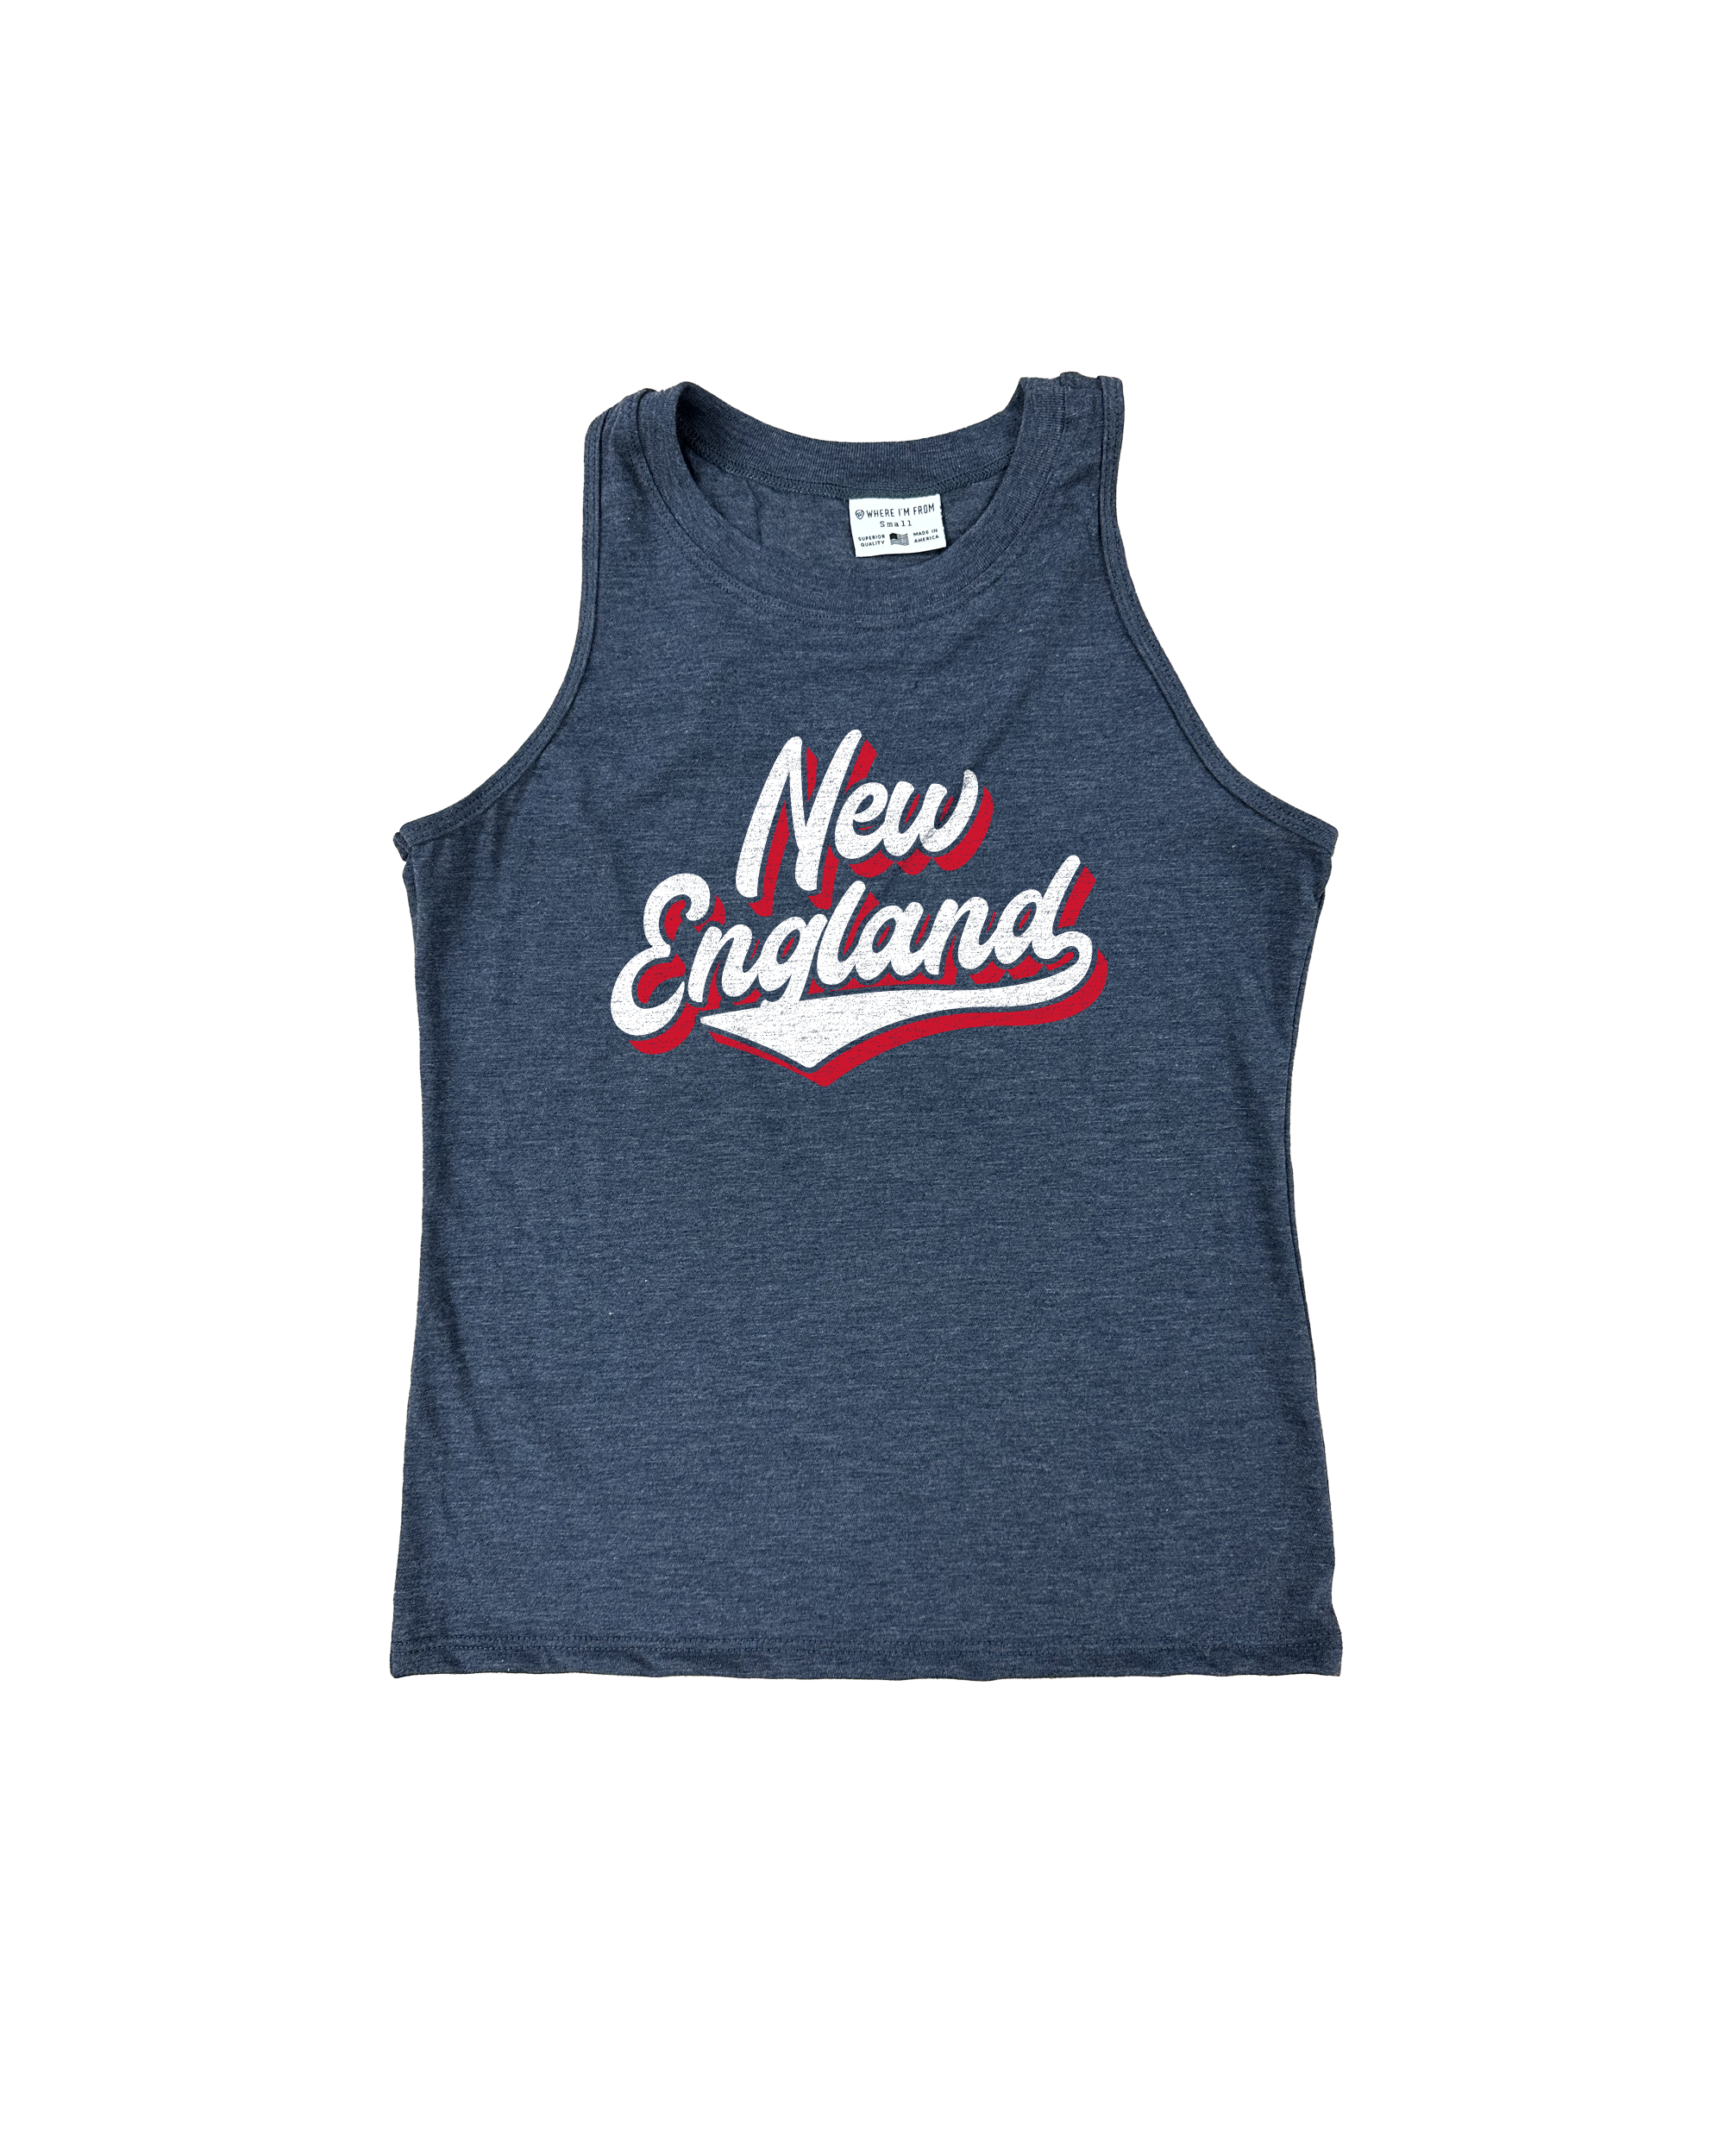 New England Script Navy Relaxed Tank